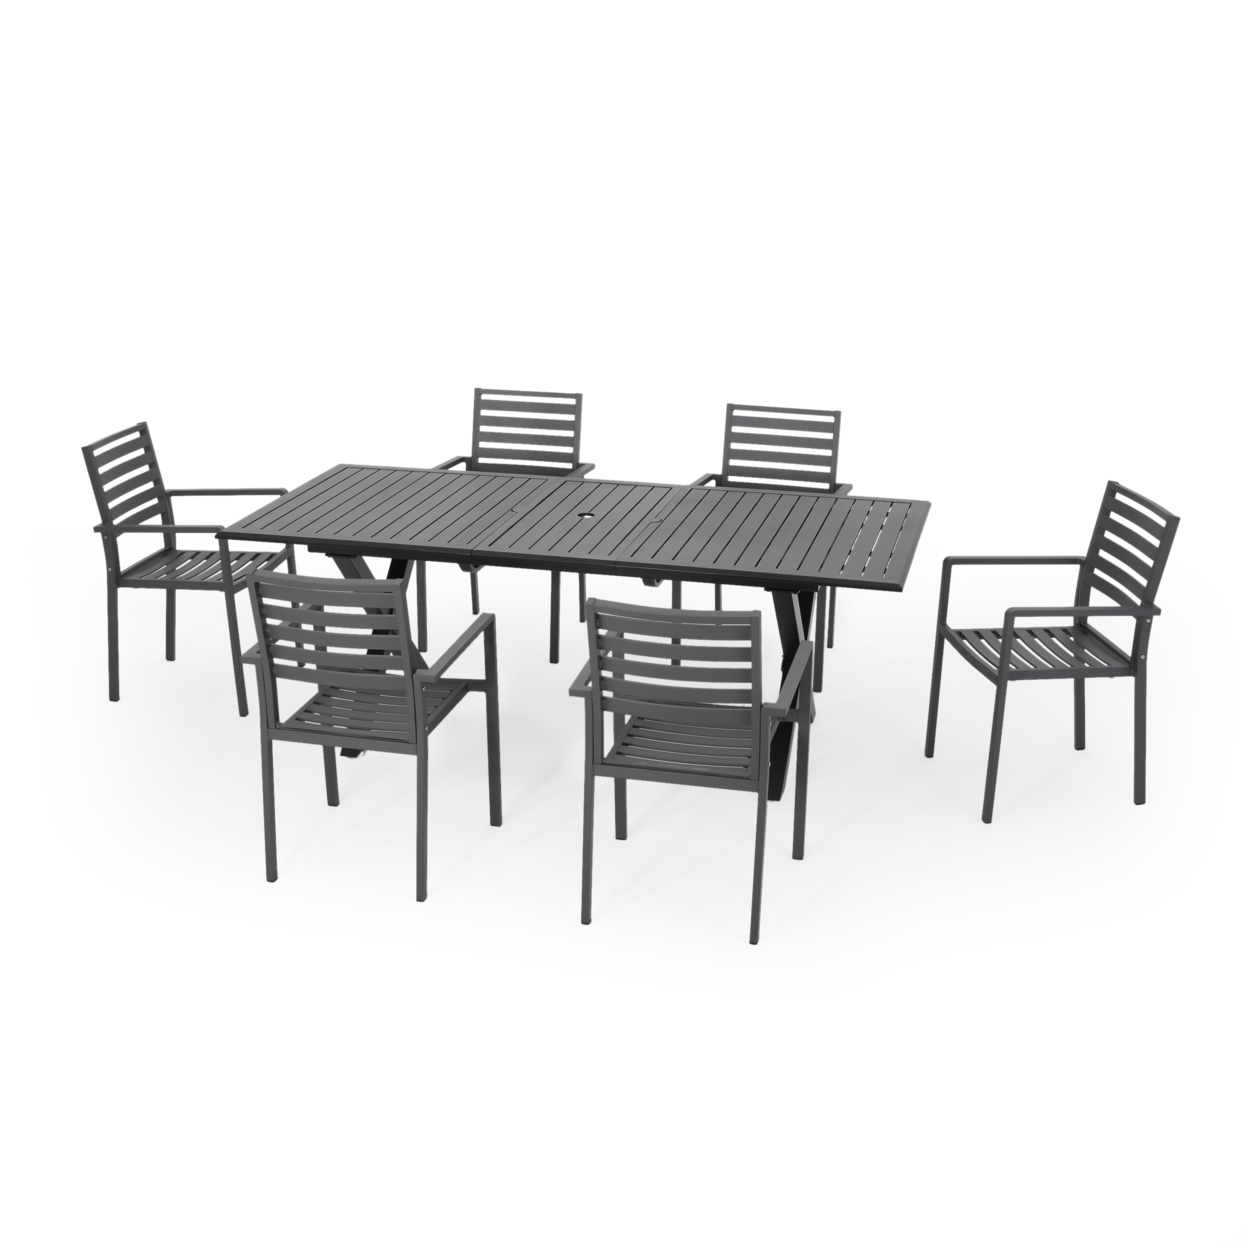 Carrie Outdoor Modern 6 Seater Aluminum Dining Set With Expandable Table